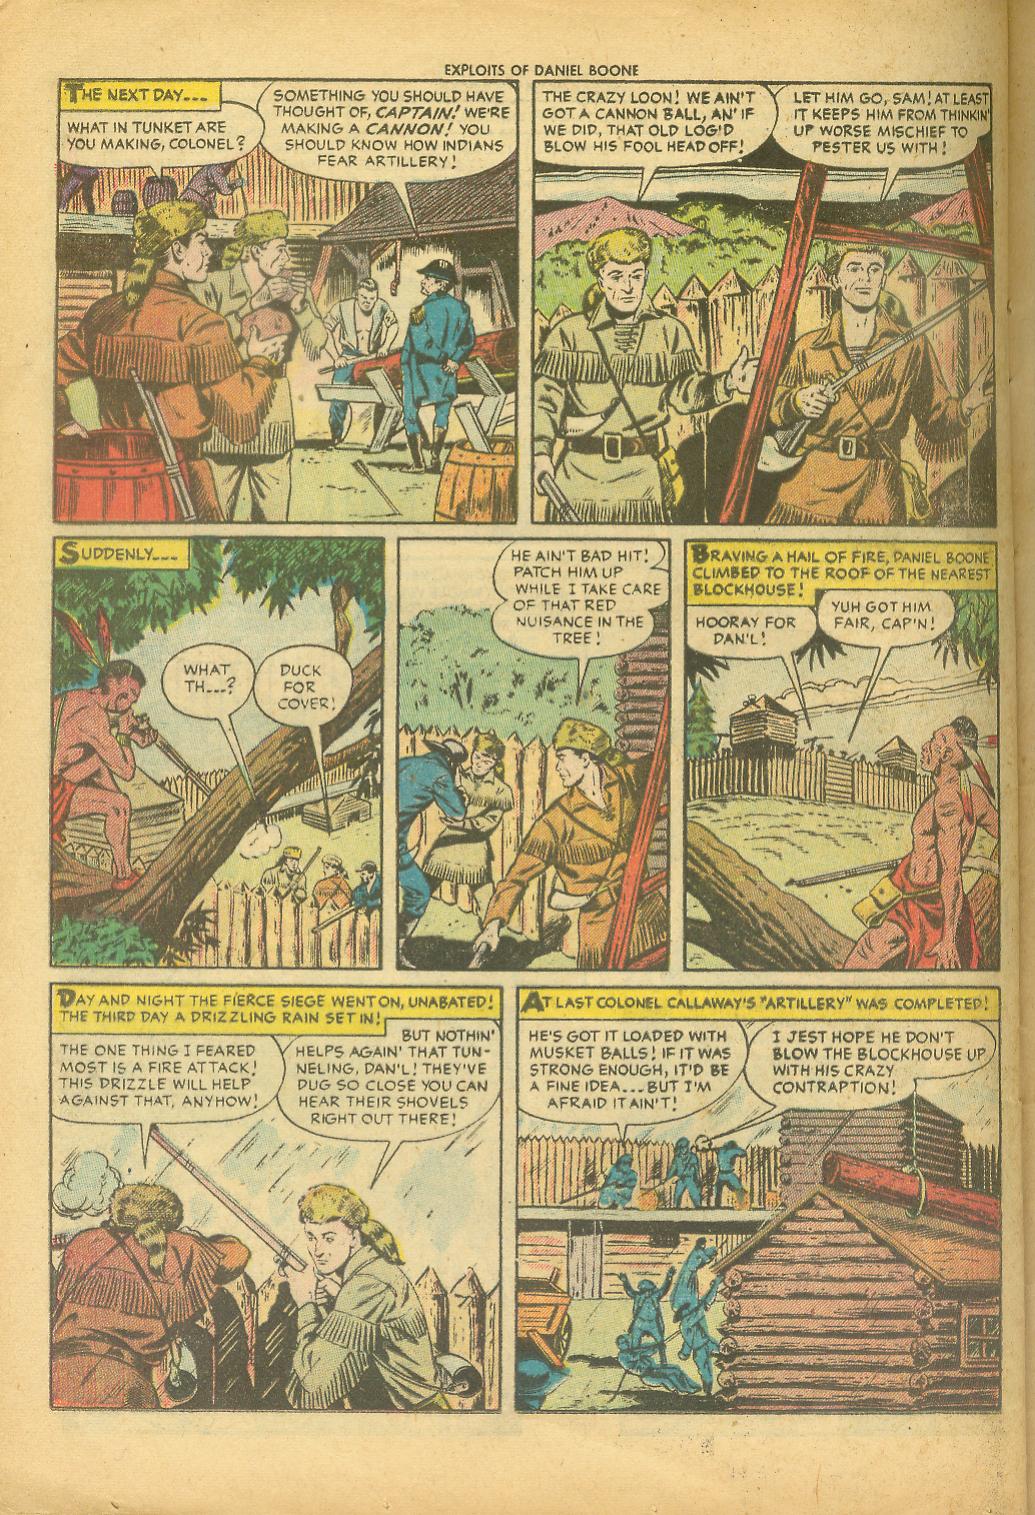 Read online Exploits of Daniel Boone comic -  Issue #1 - 24